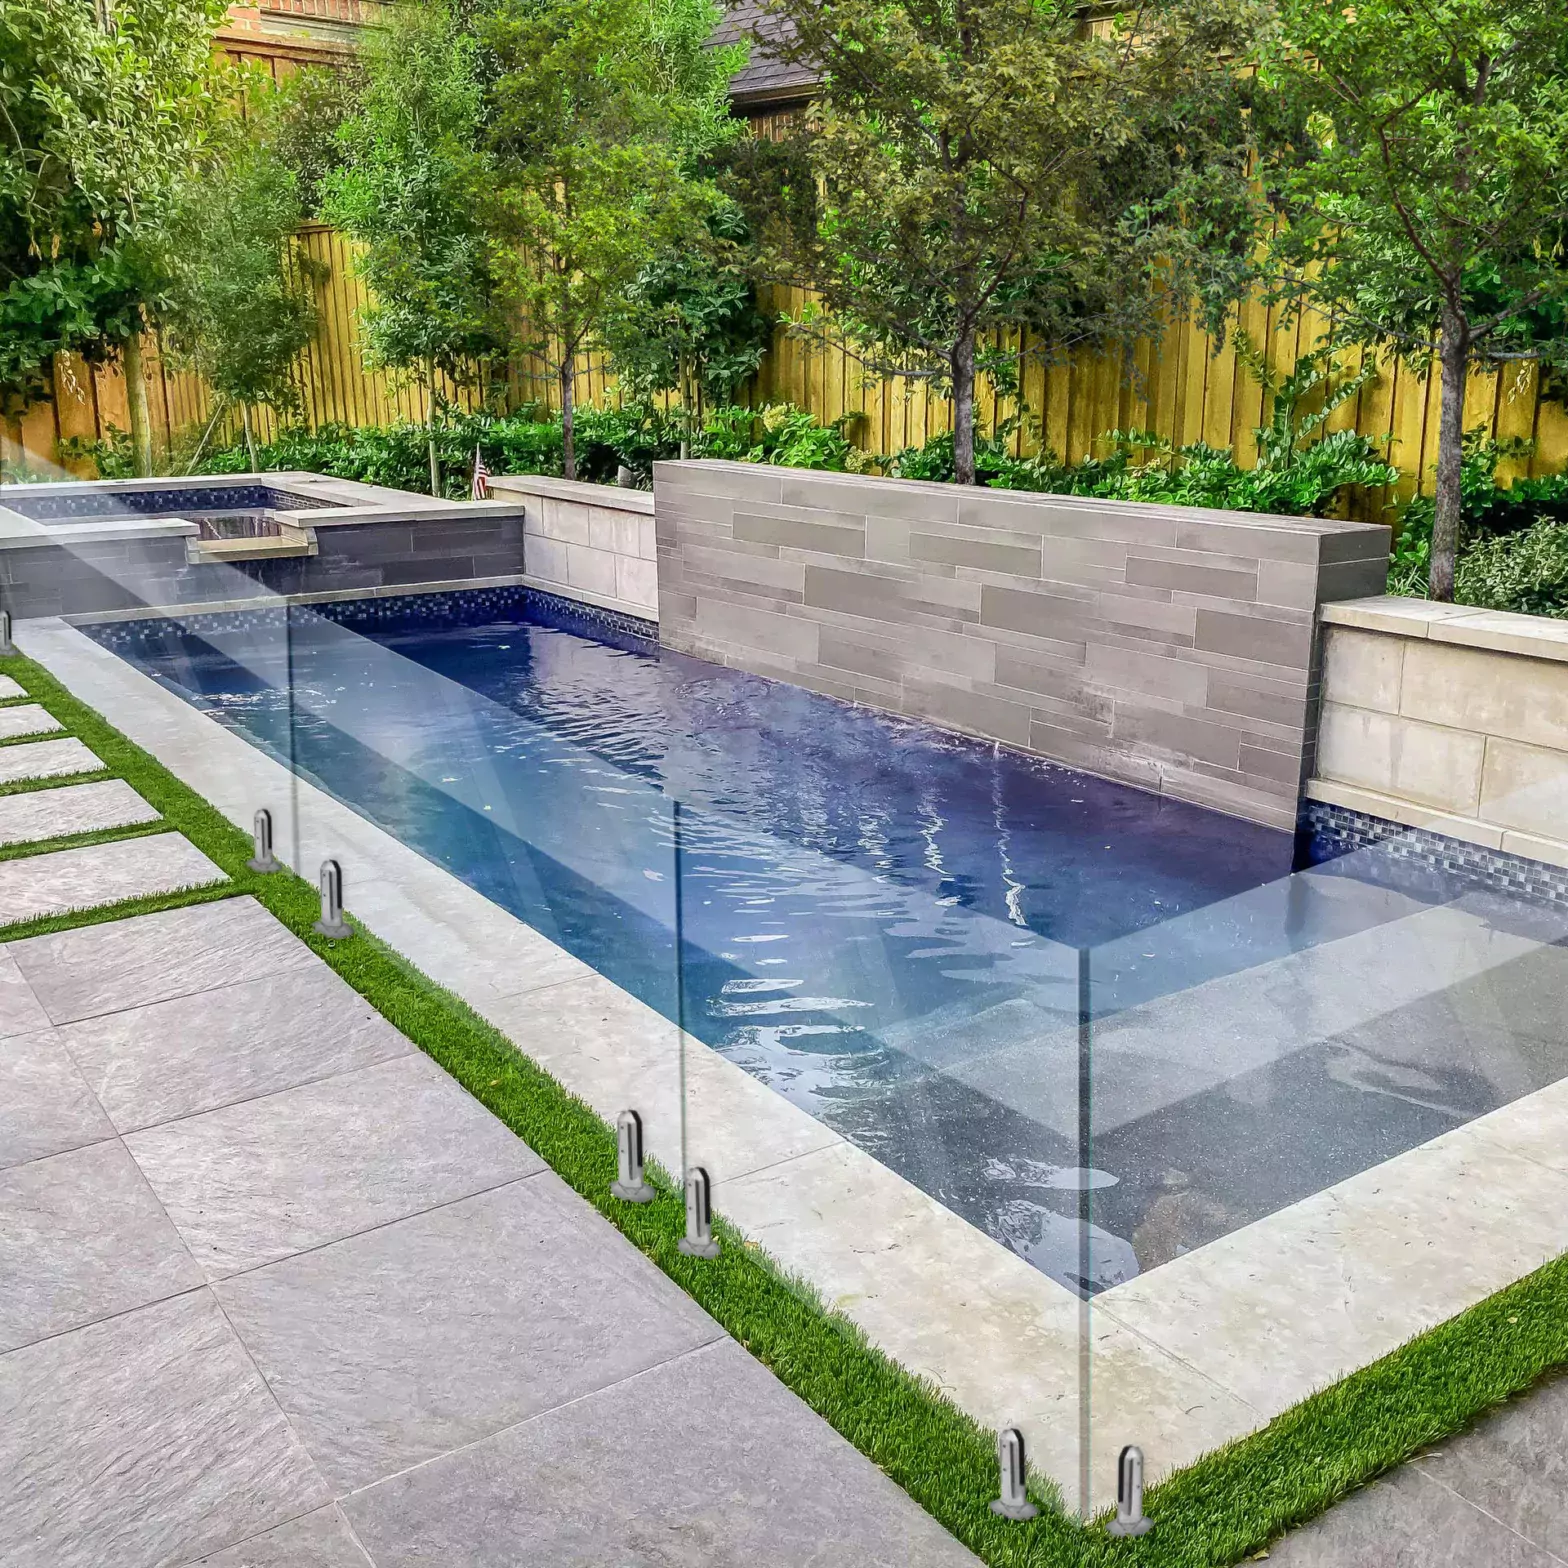 Glass pool fencing